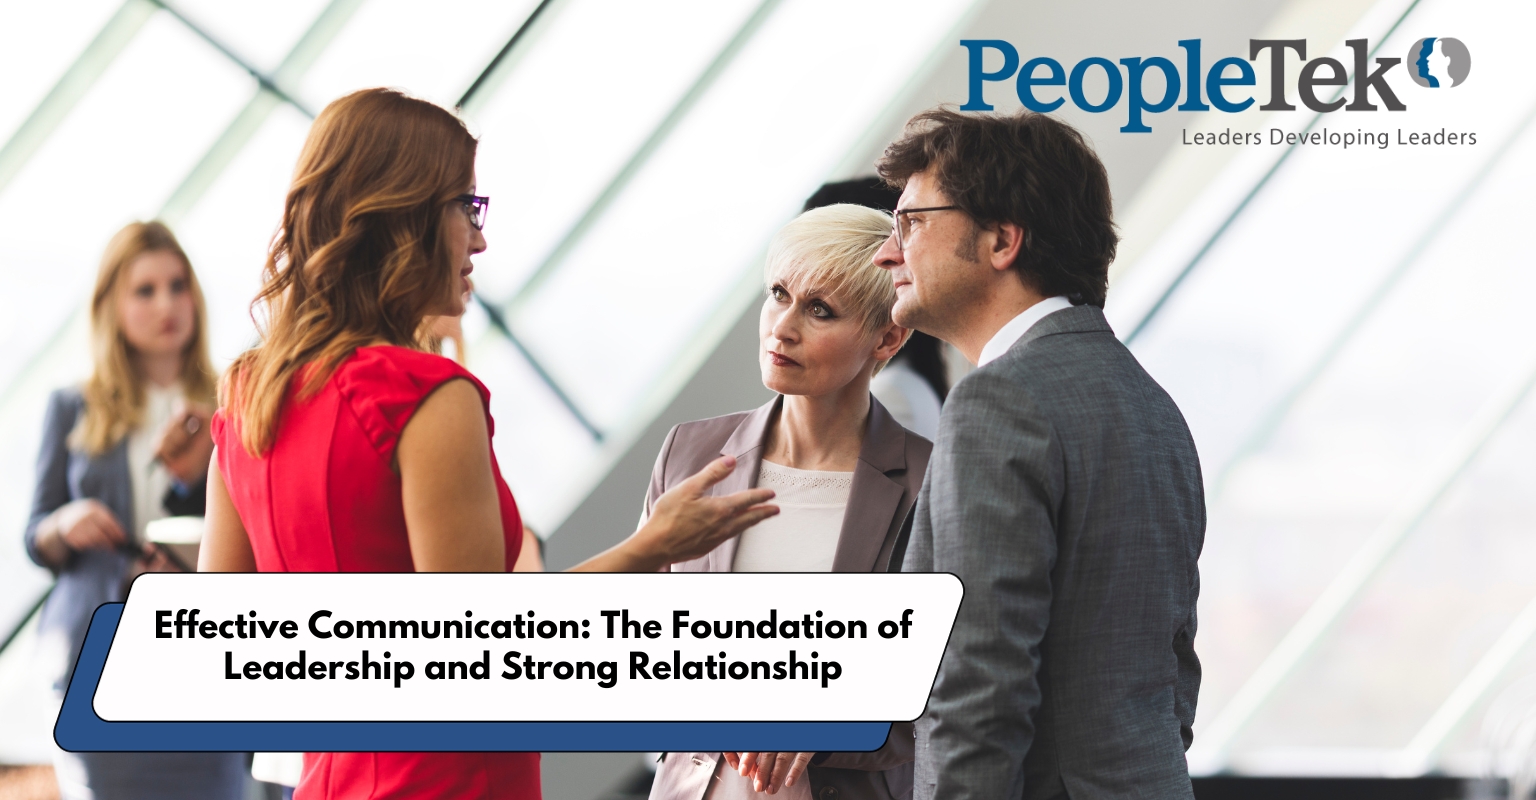 Effective Communication: The Foundation of Leadership and Strong Relationship